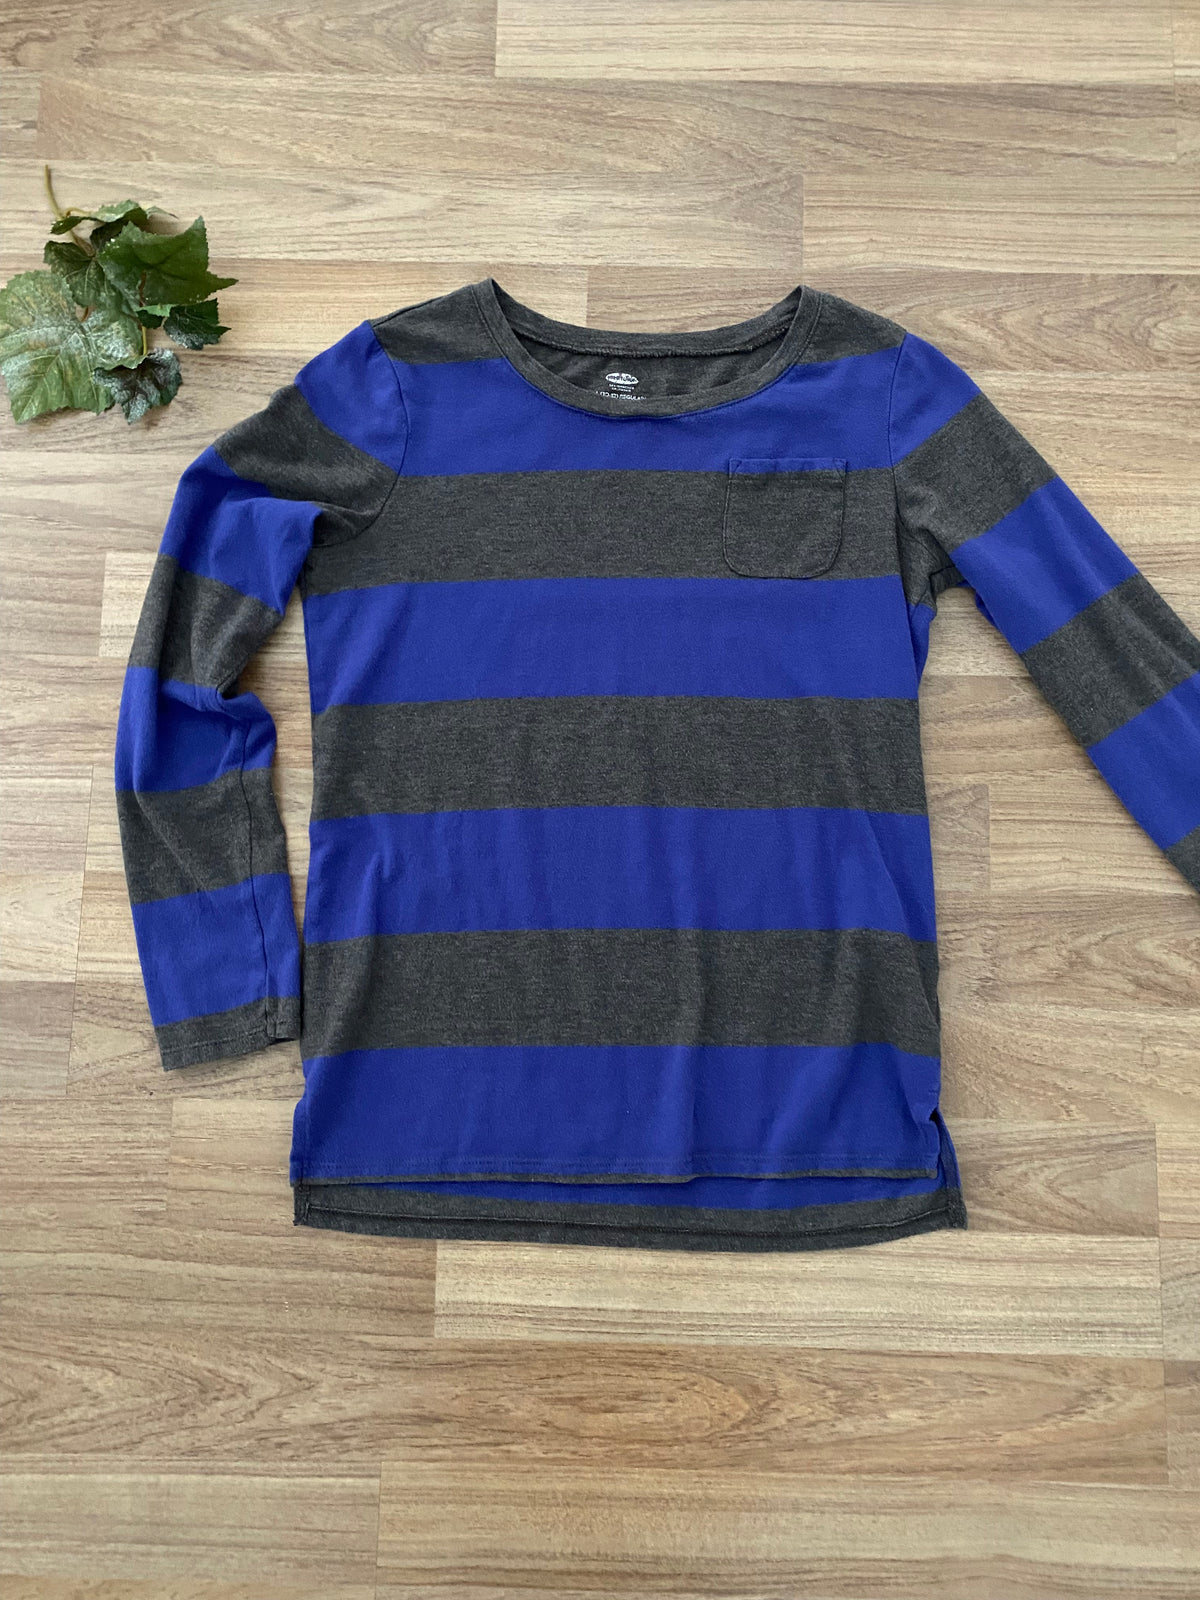 Long Sleeve Striped Top (Boys Size 10-12)